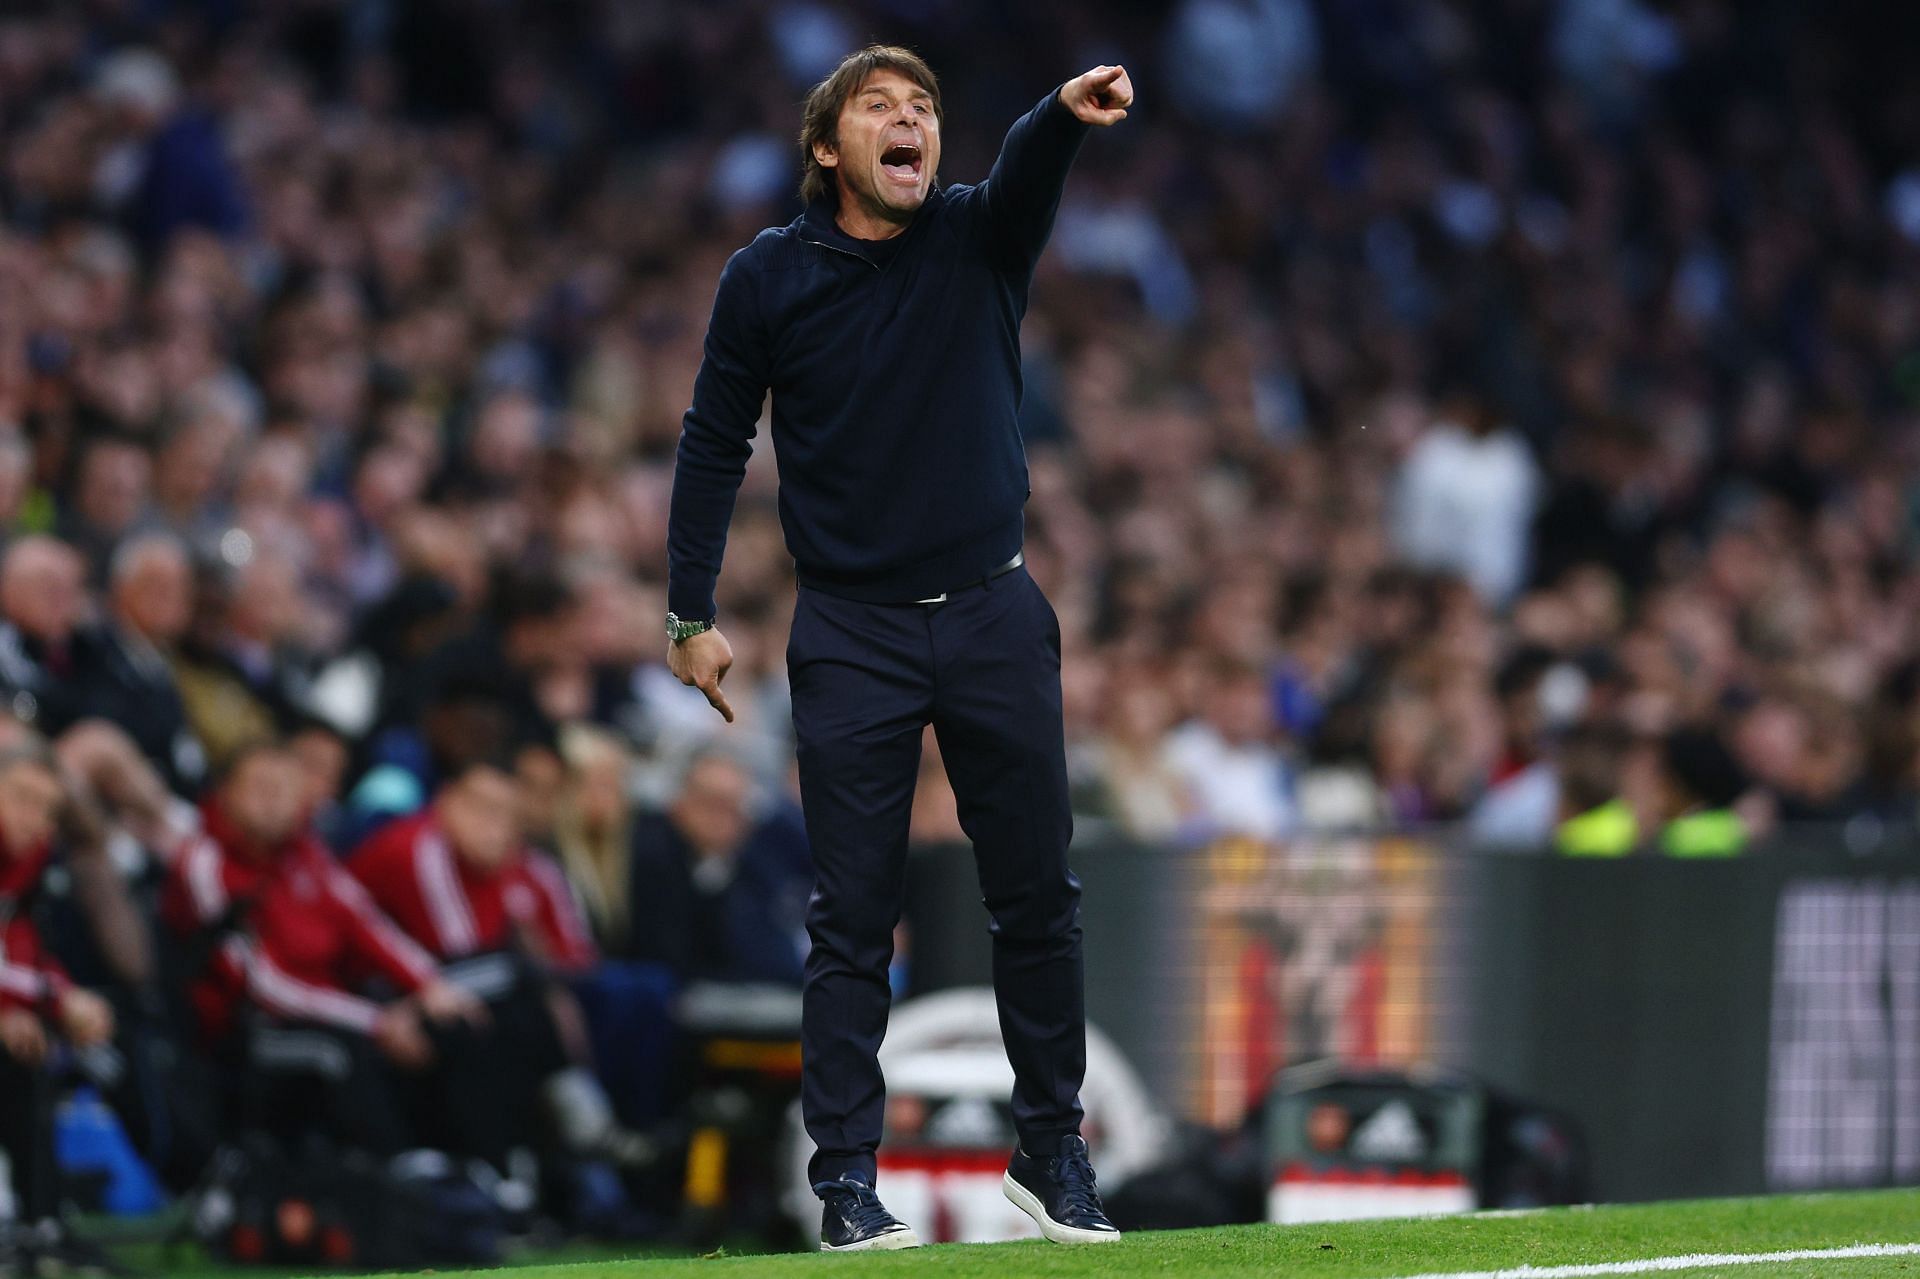 Conte guided Tottenham to a fouth place finish last season.